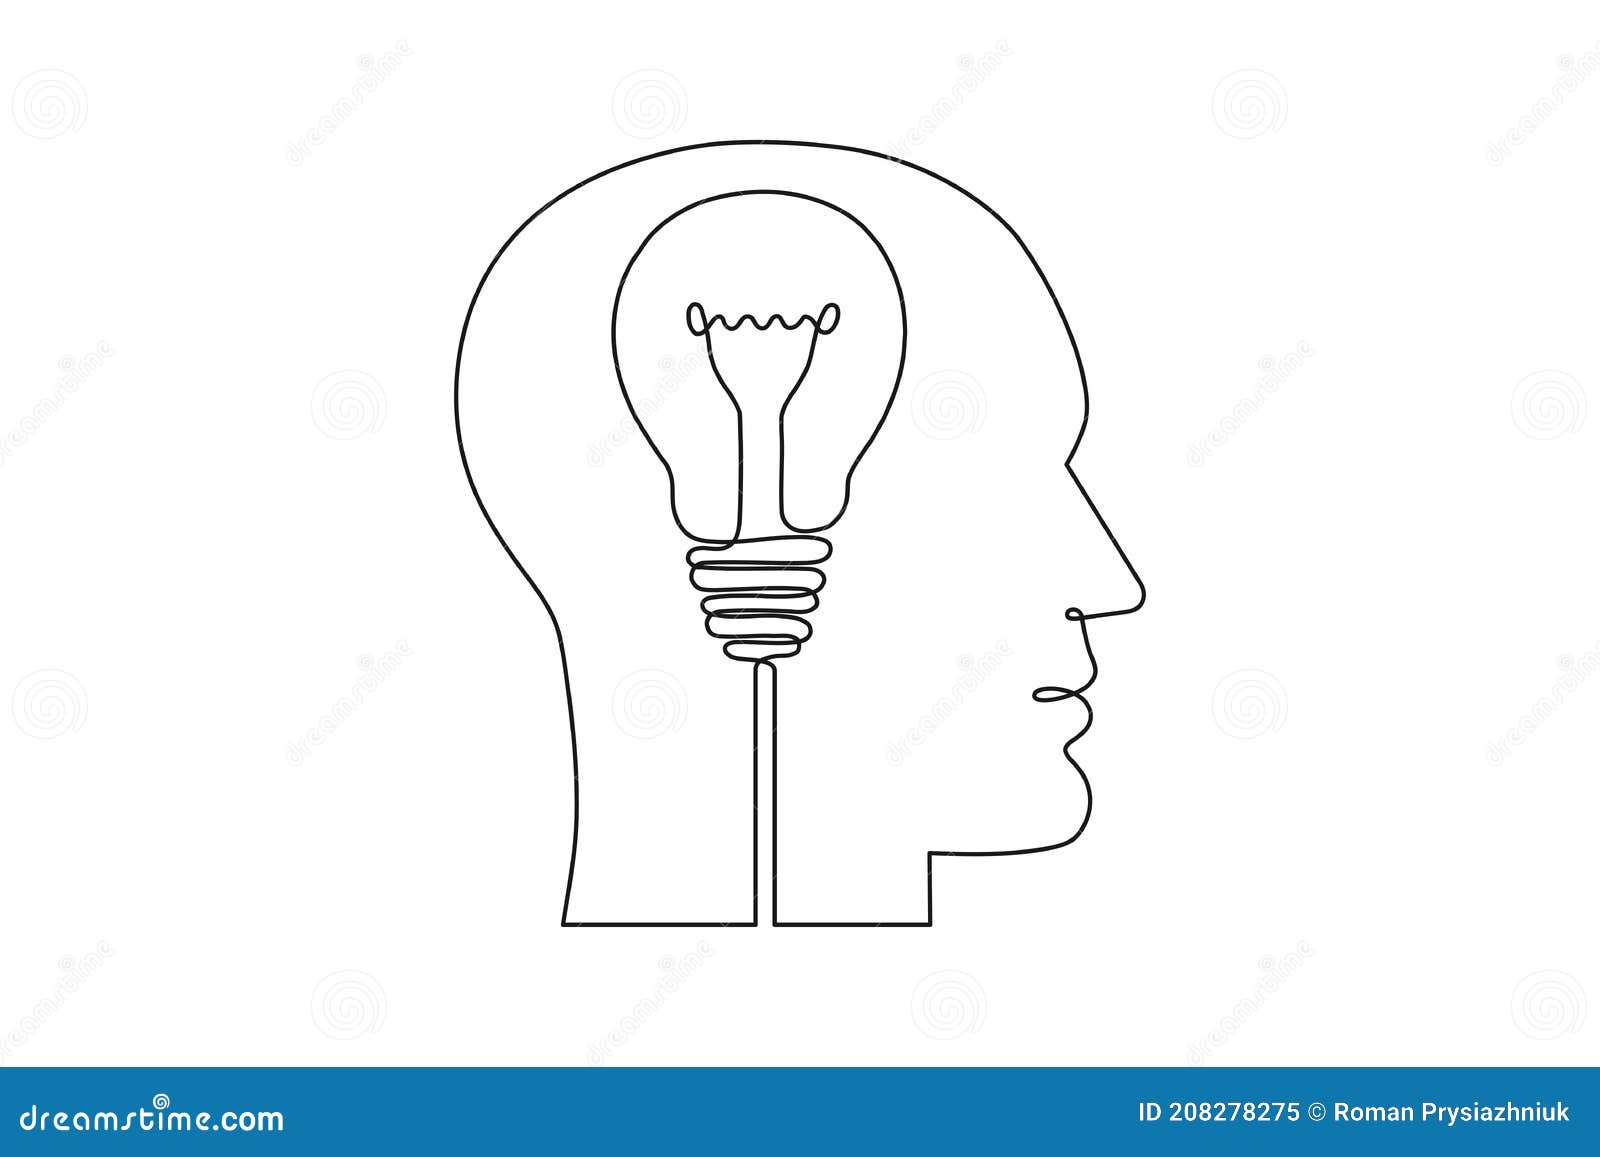 continuous one line drawing of human head and electric light bulb. concept of idea emergence. 